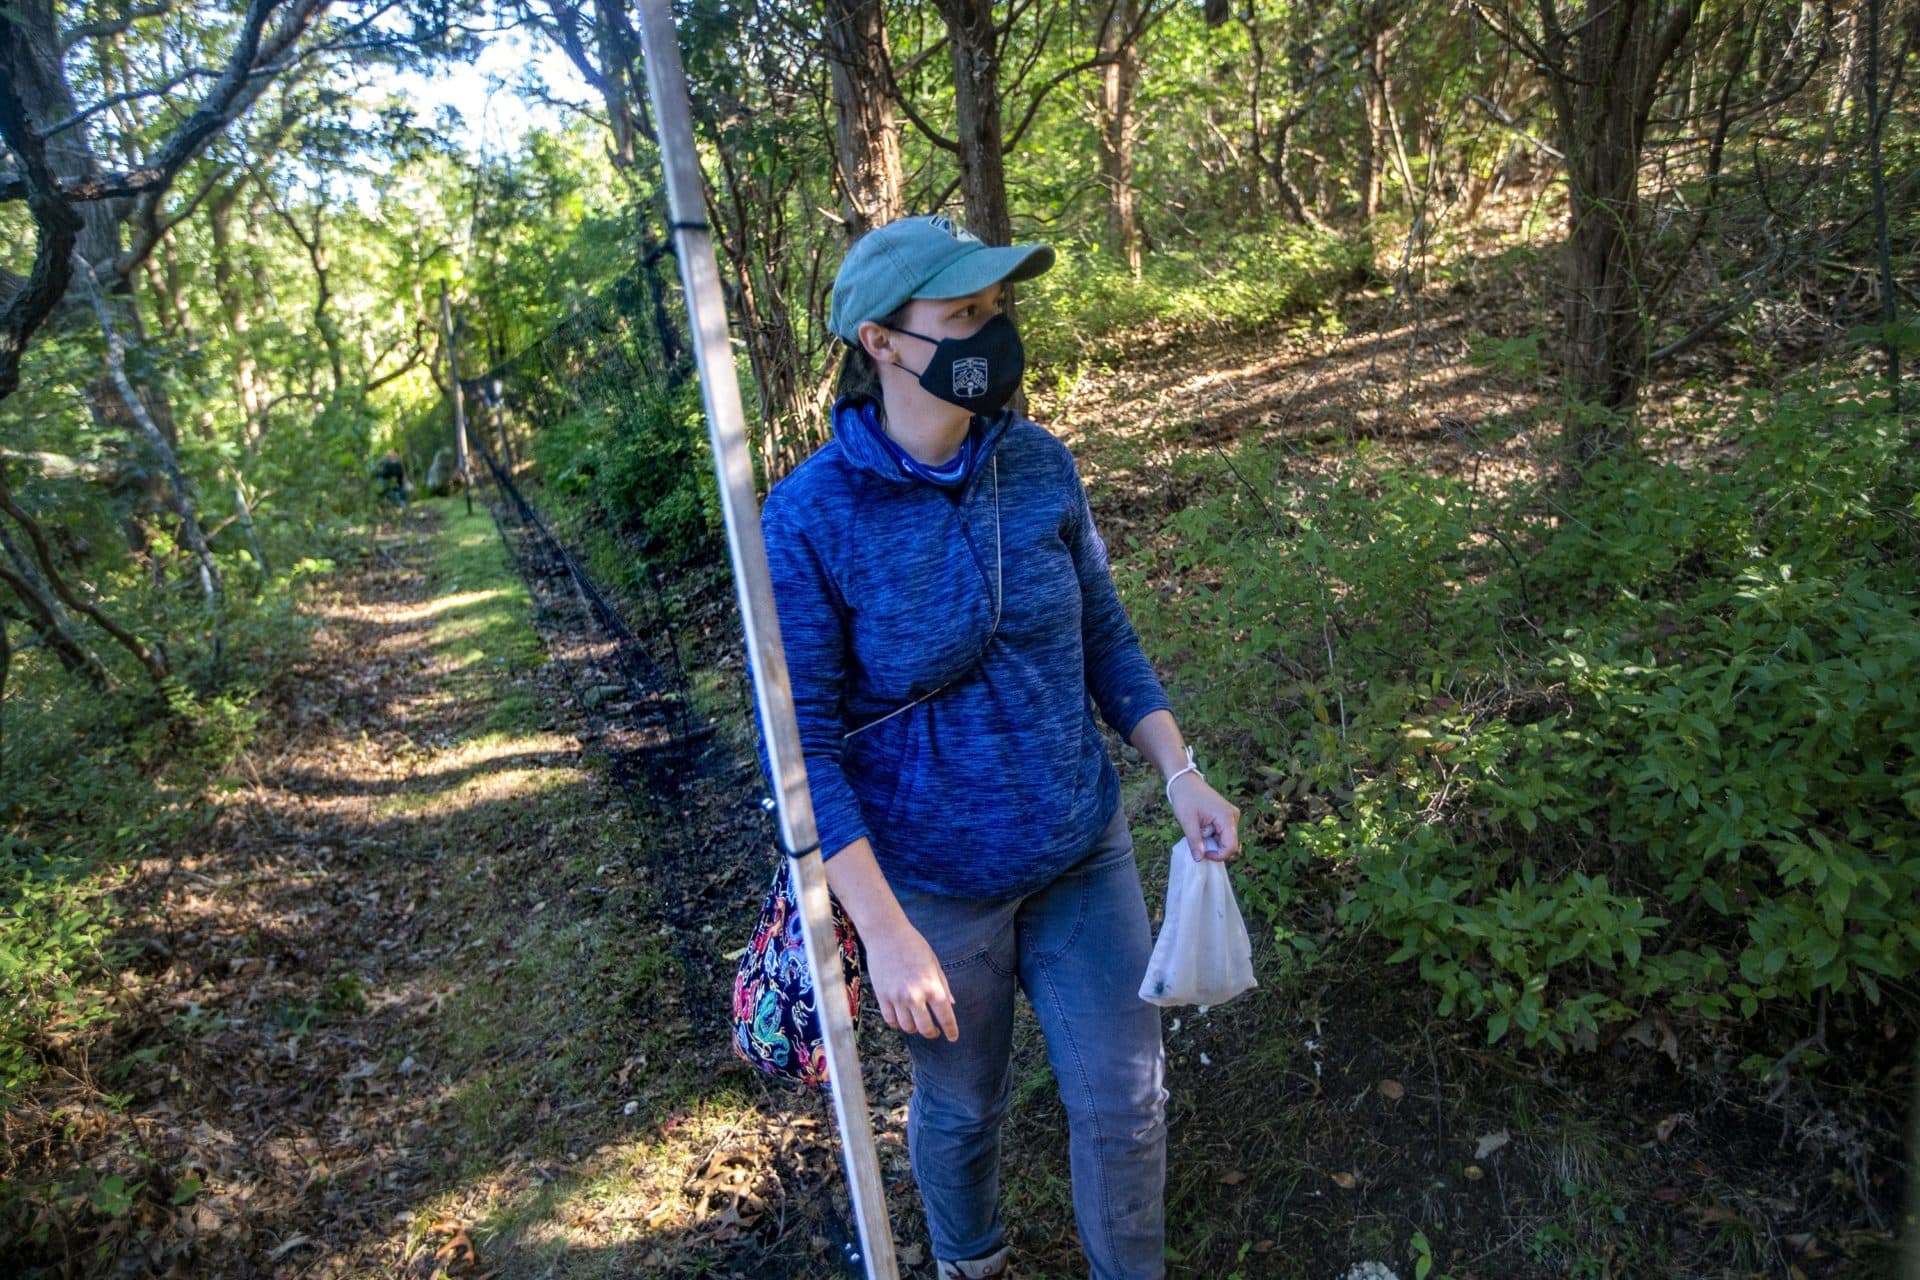 Megan Gray walks through the woods checking the nets for migrating birds she can bring back to the lab for banding at Manomet in Plymouth. (Jesse Costa/WBUR)